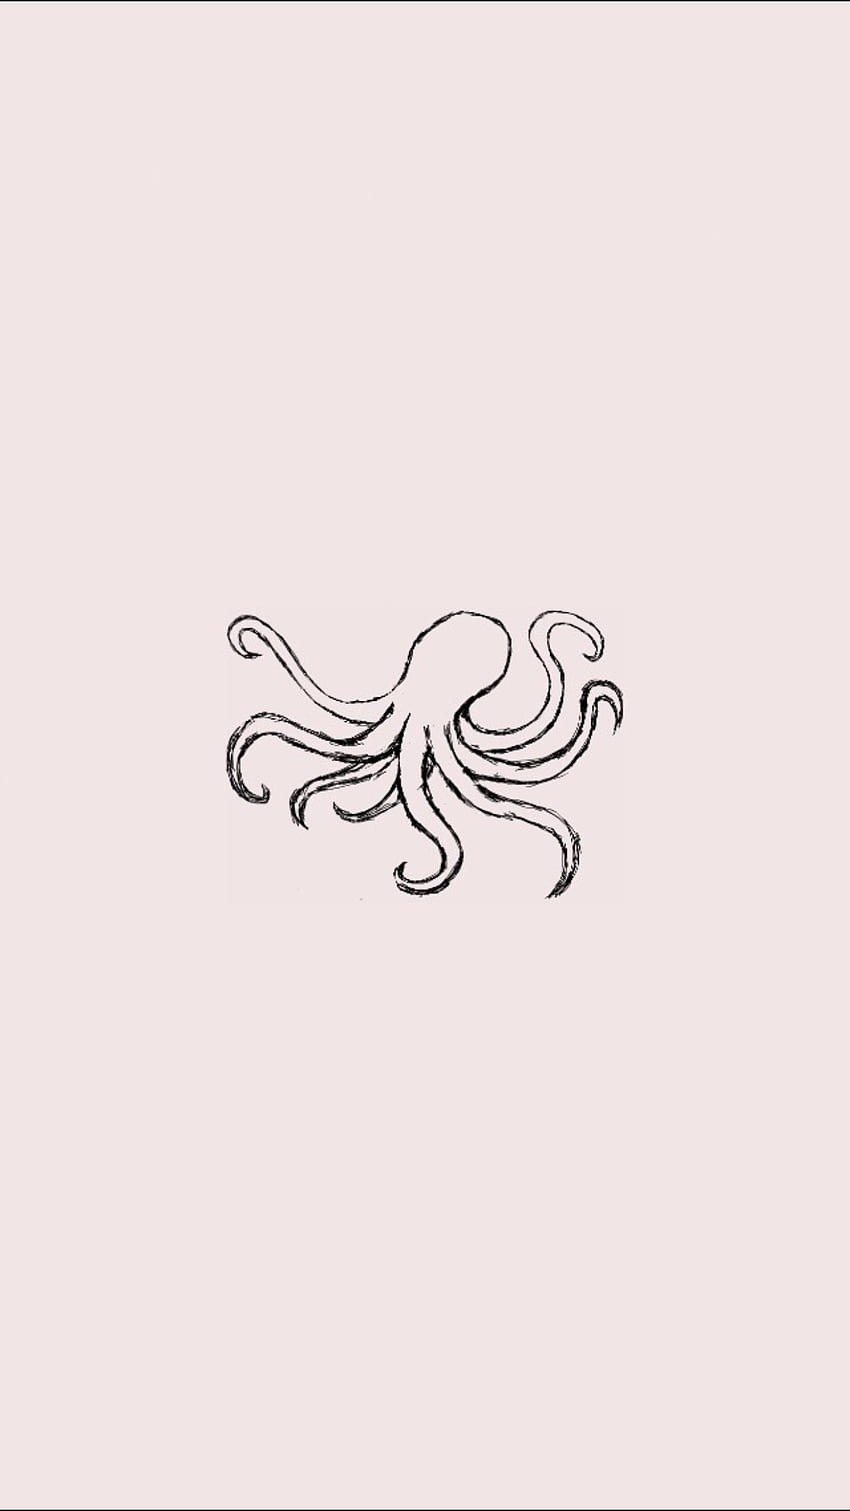 octopus line drawing